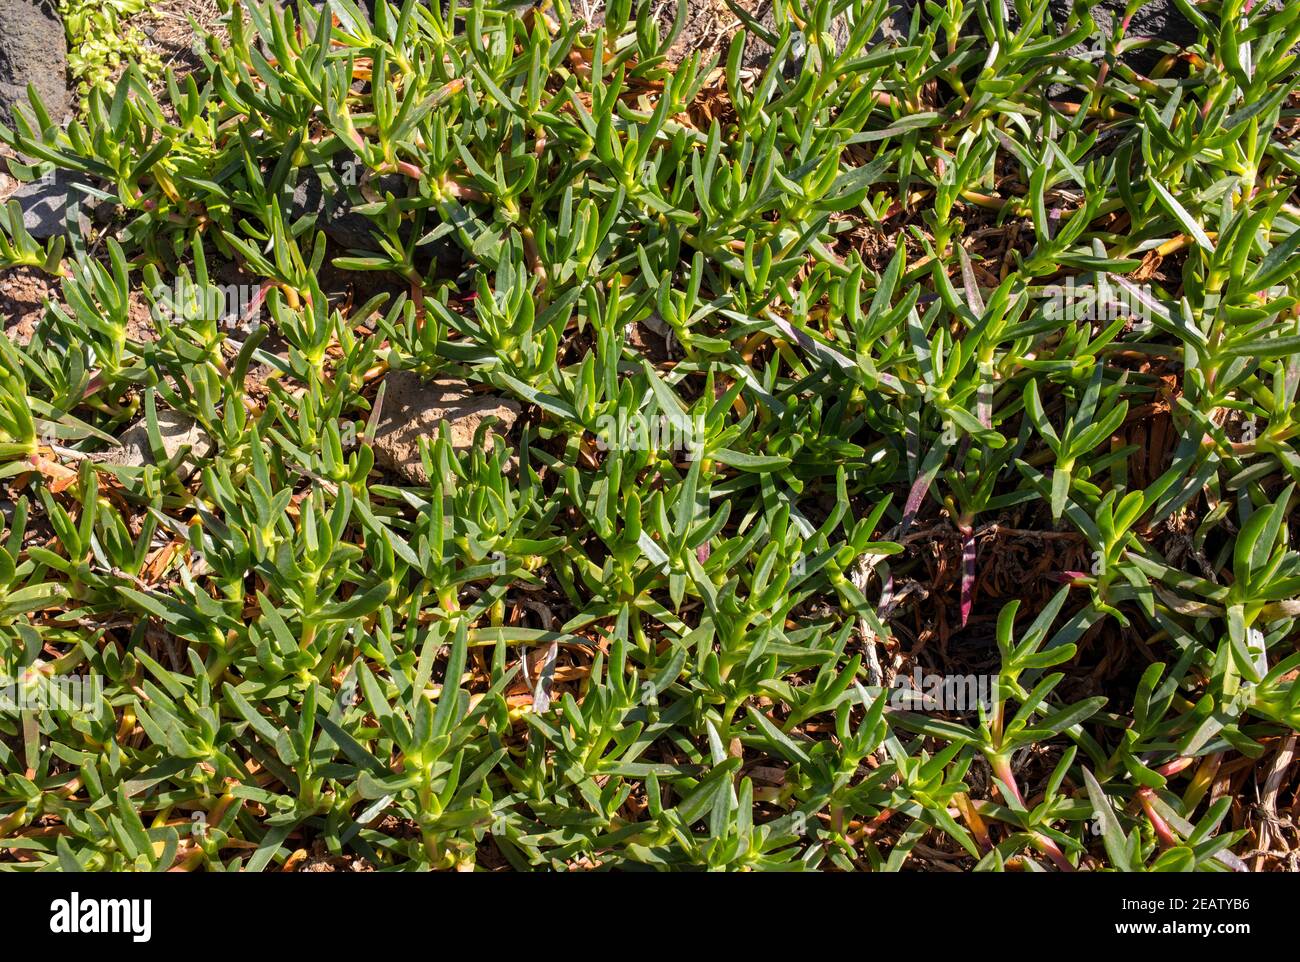 sedum succulent plant with  green, thick and fleshy leaves in garden Stock Photo